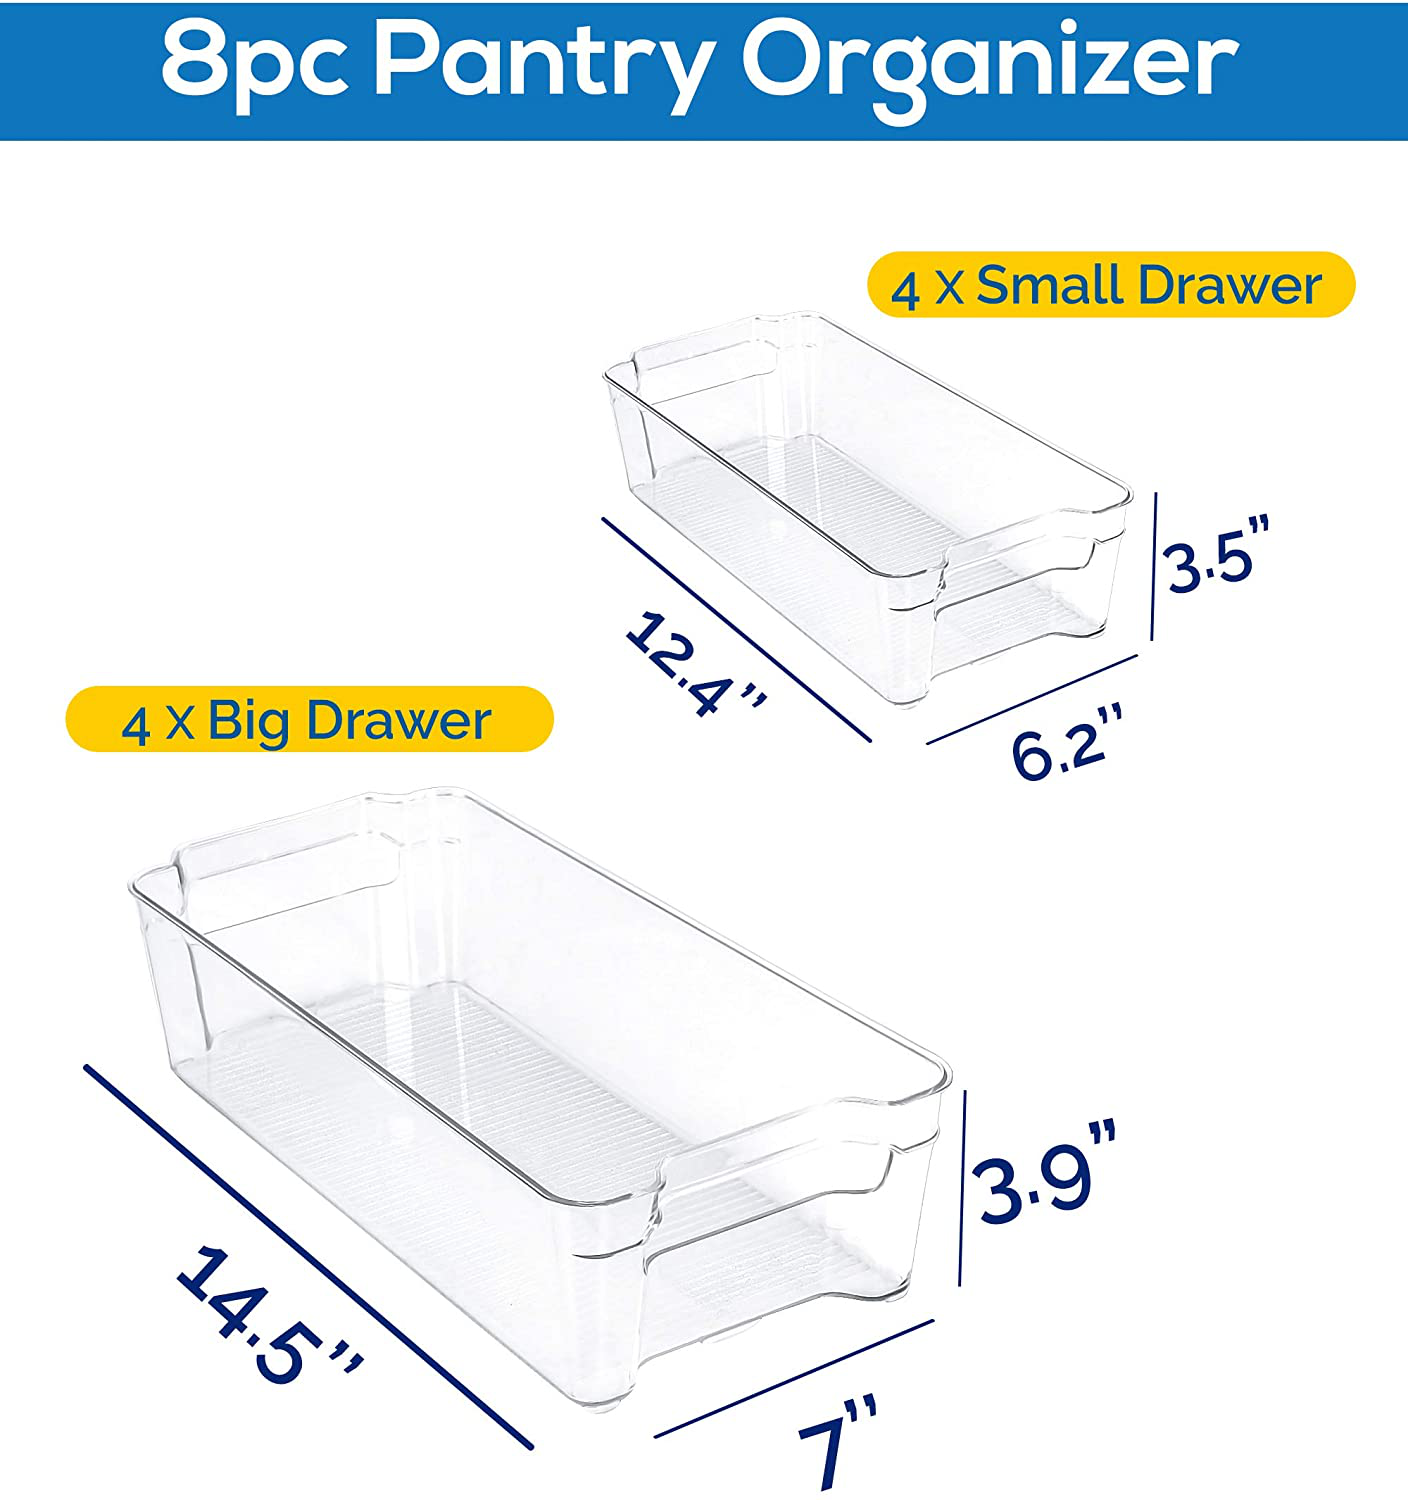 Set of 8 Pantry Organizers For Refrigerator Freezers, Kitchen Countertops and Cabinets